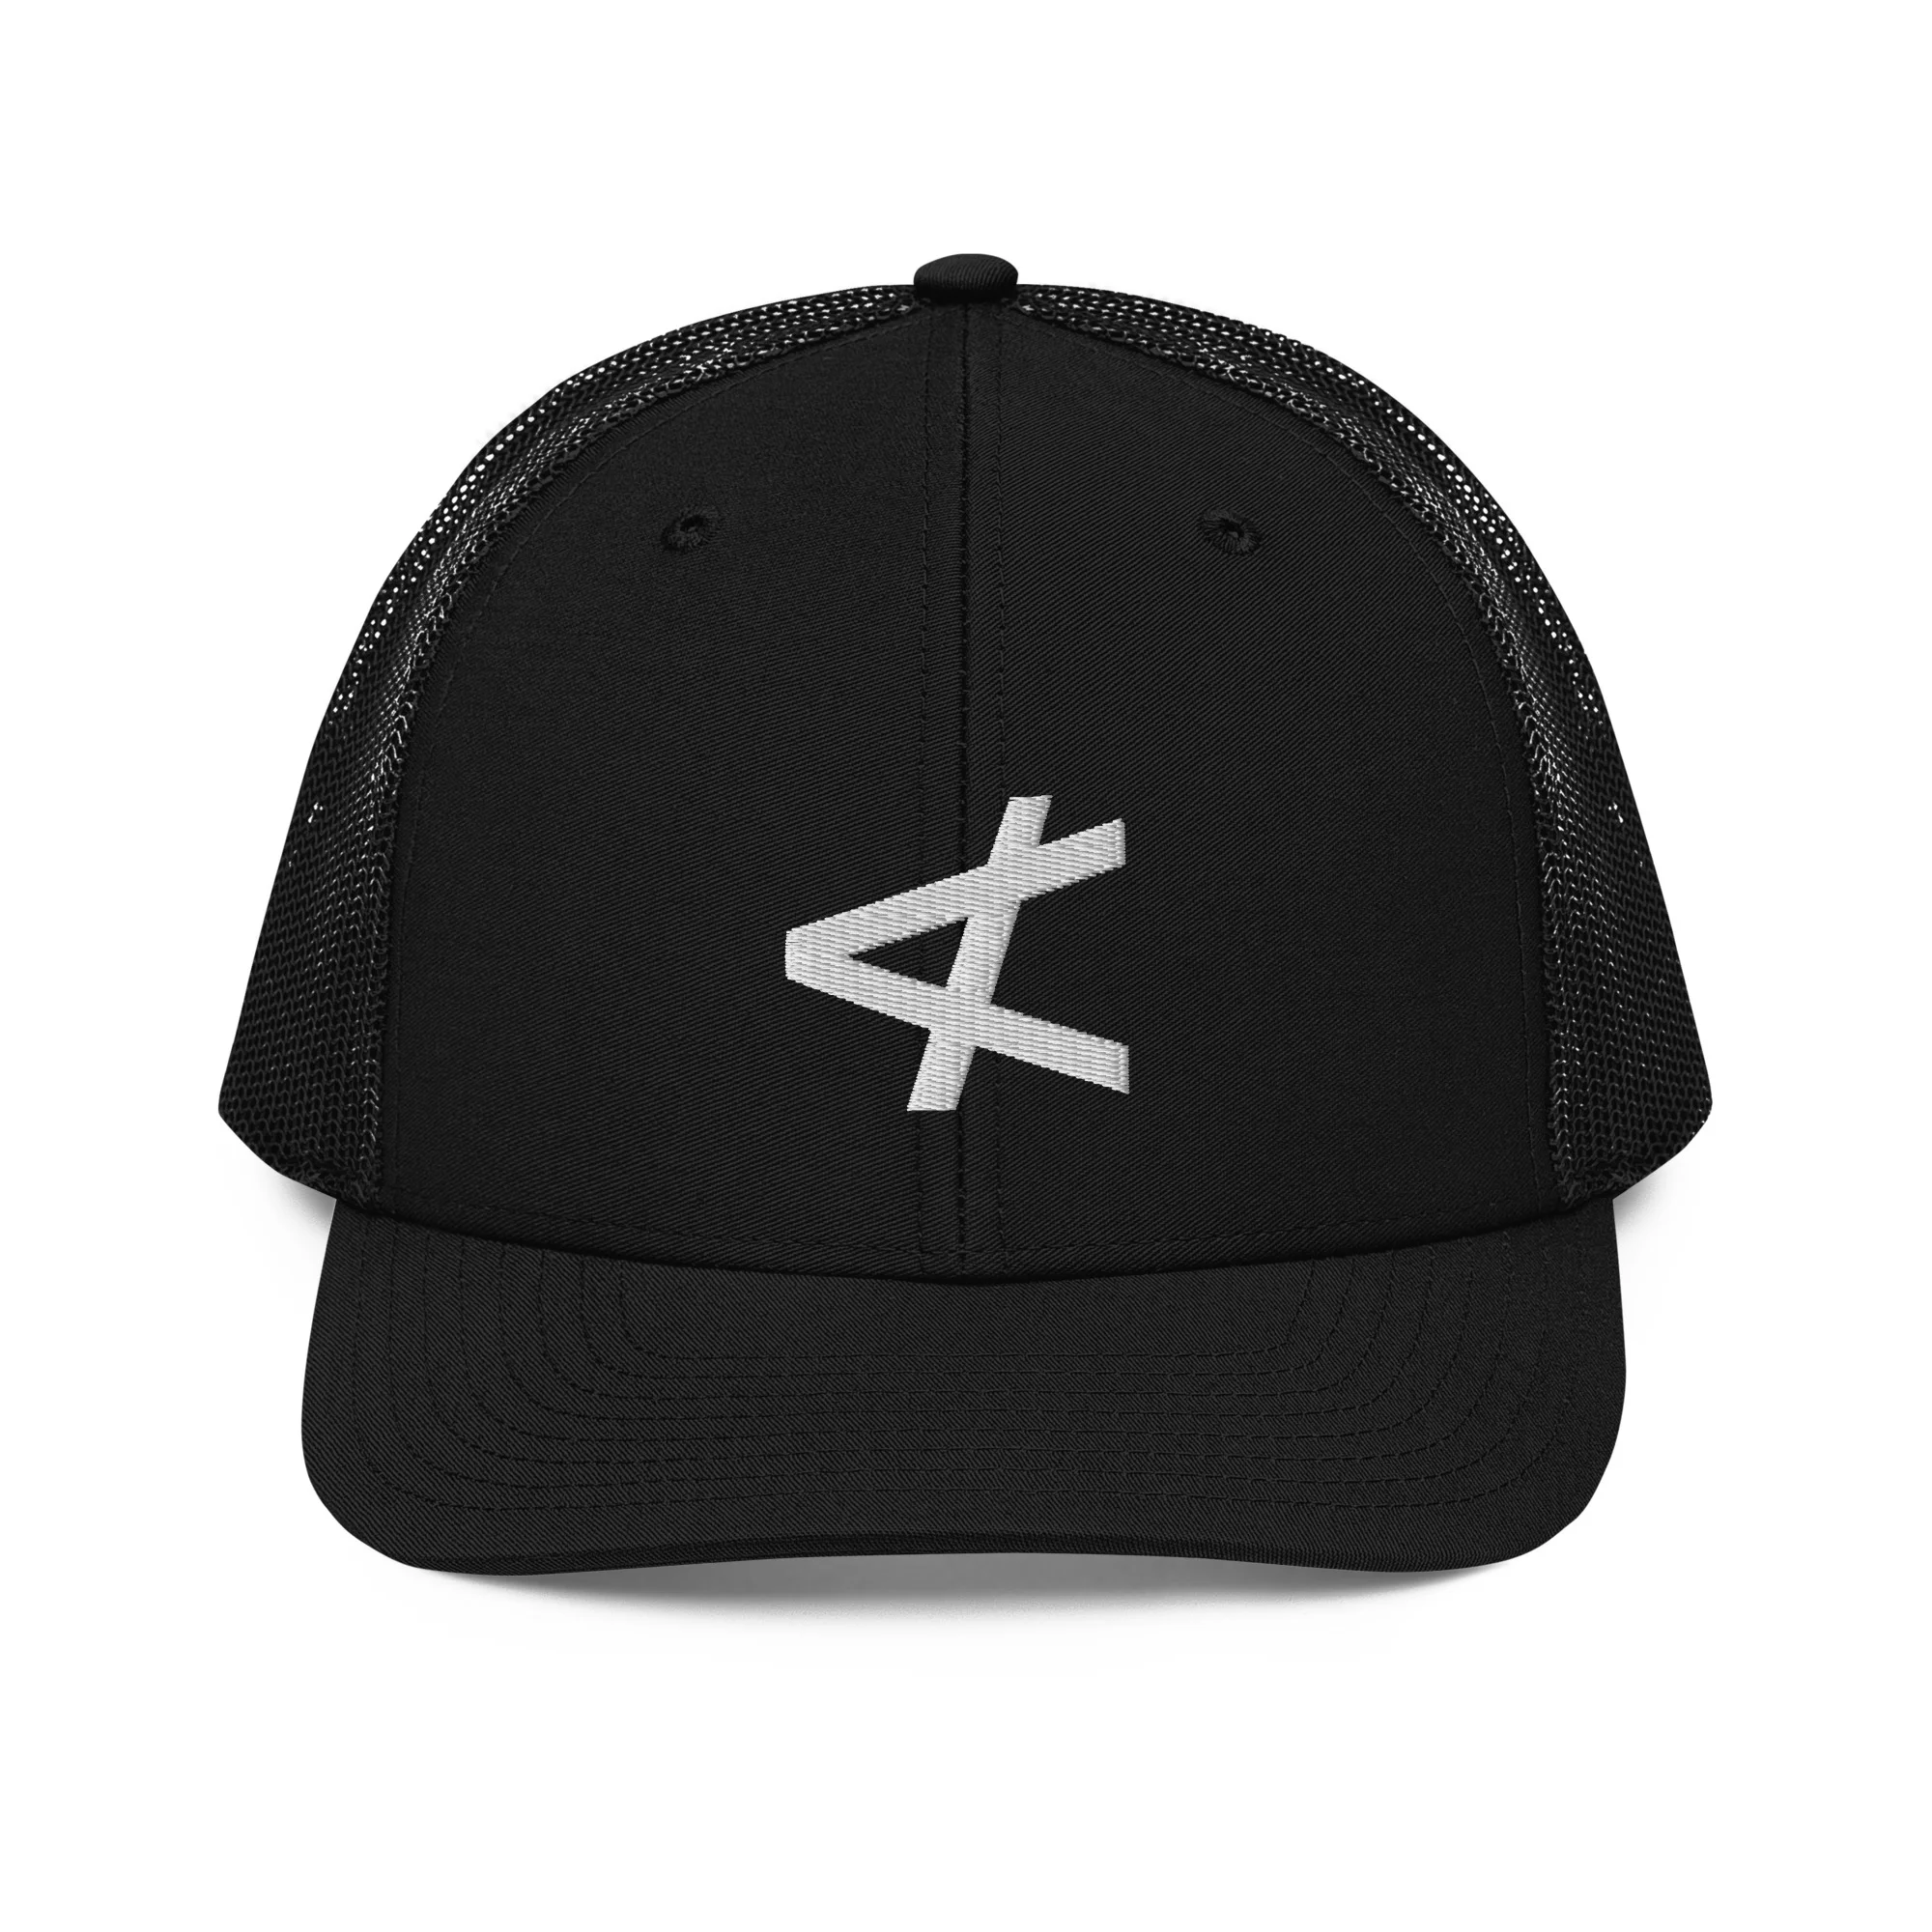 Product image for Not Less Than Trucker Cap